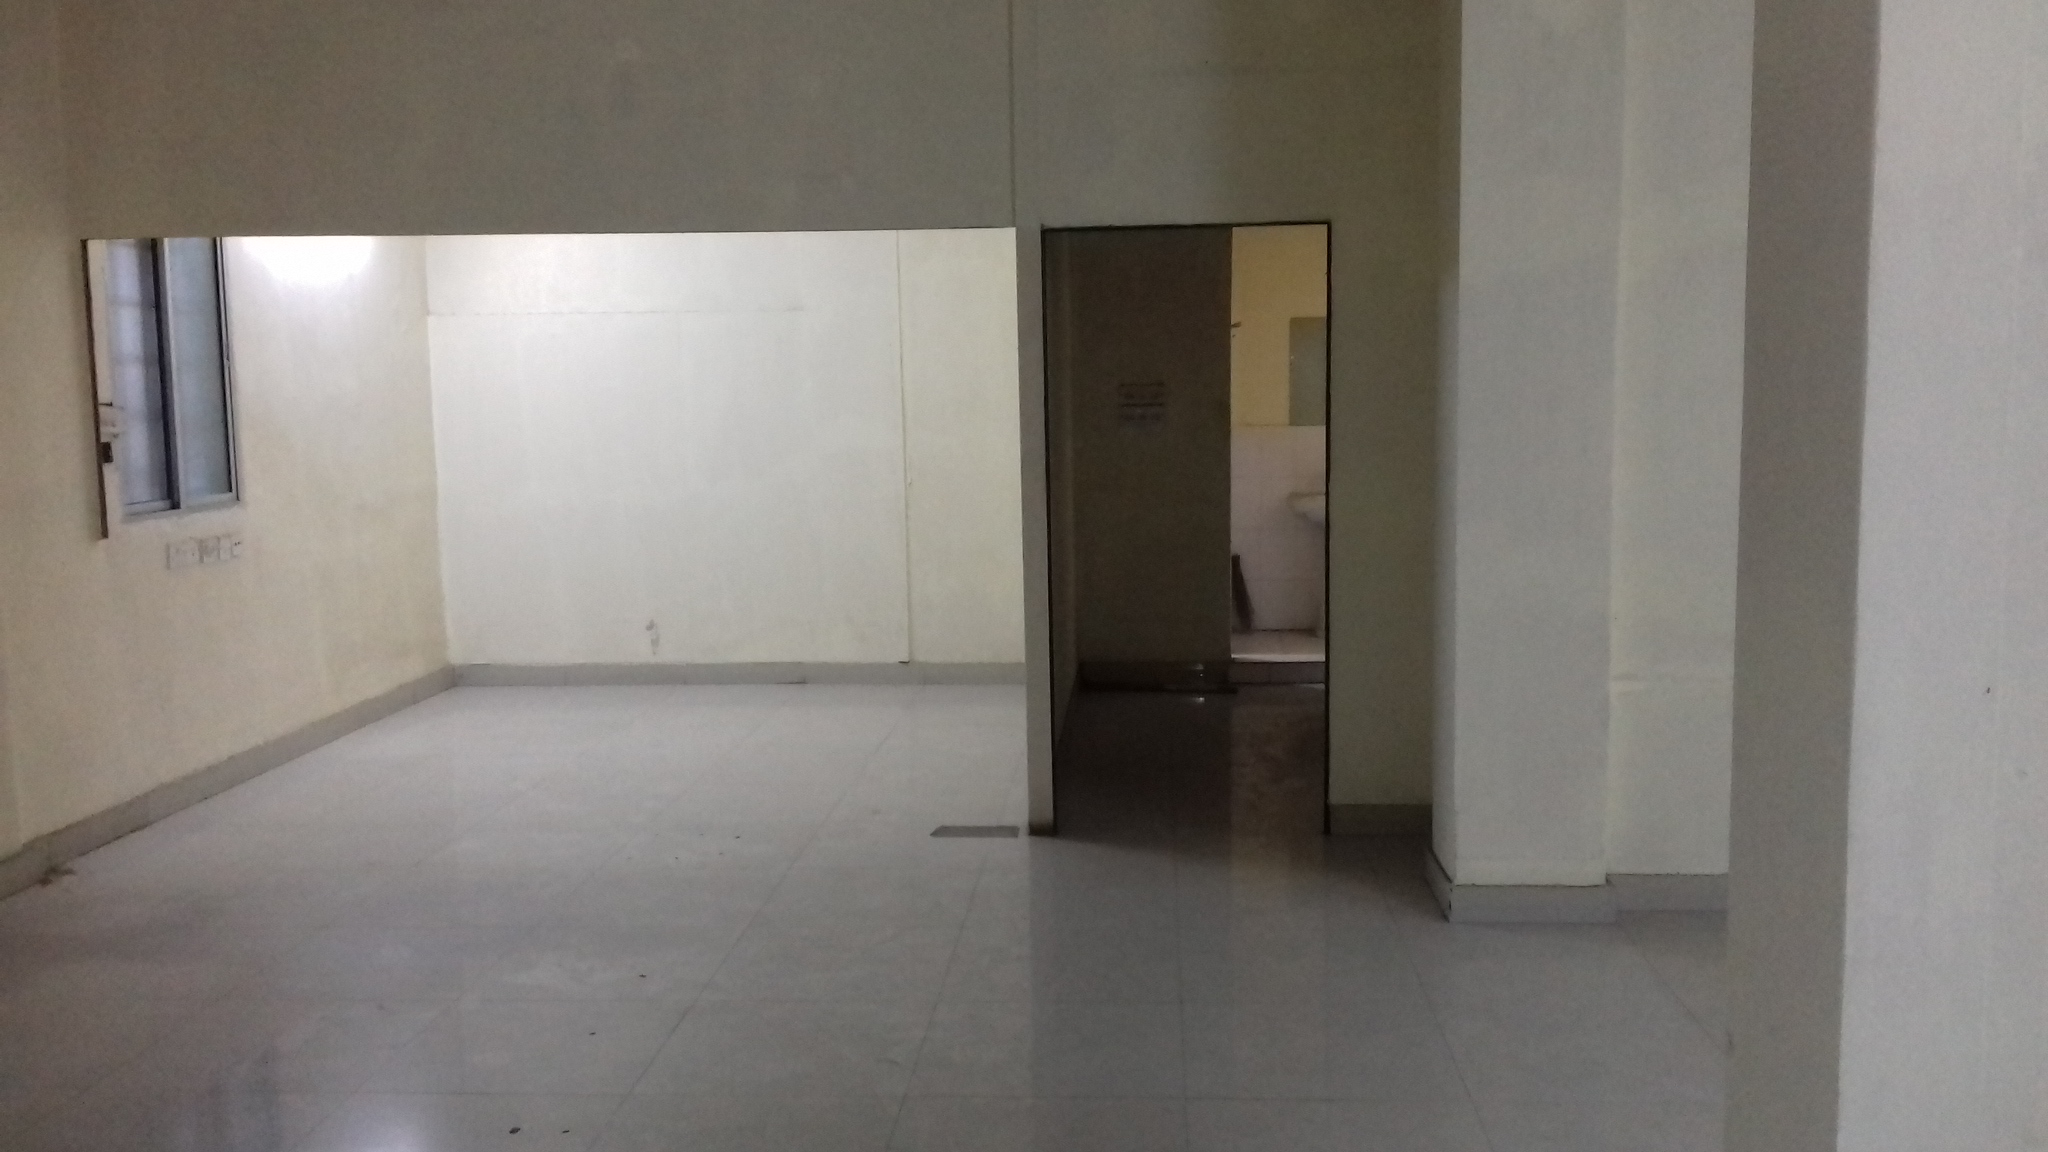 Office For Rent in Moulali Kolkata (ID: 14361)